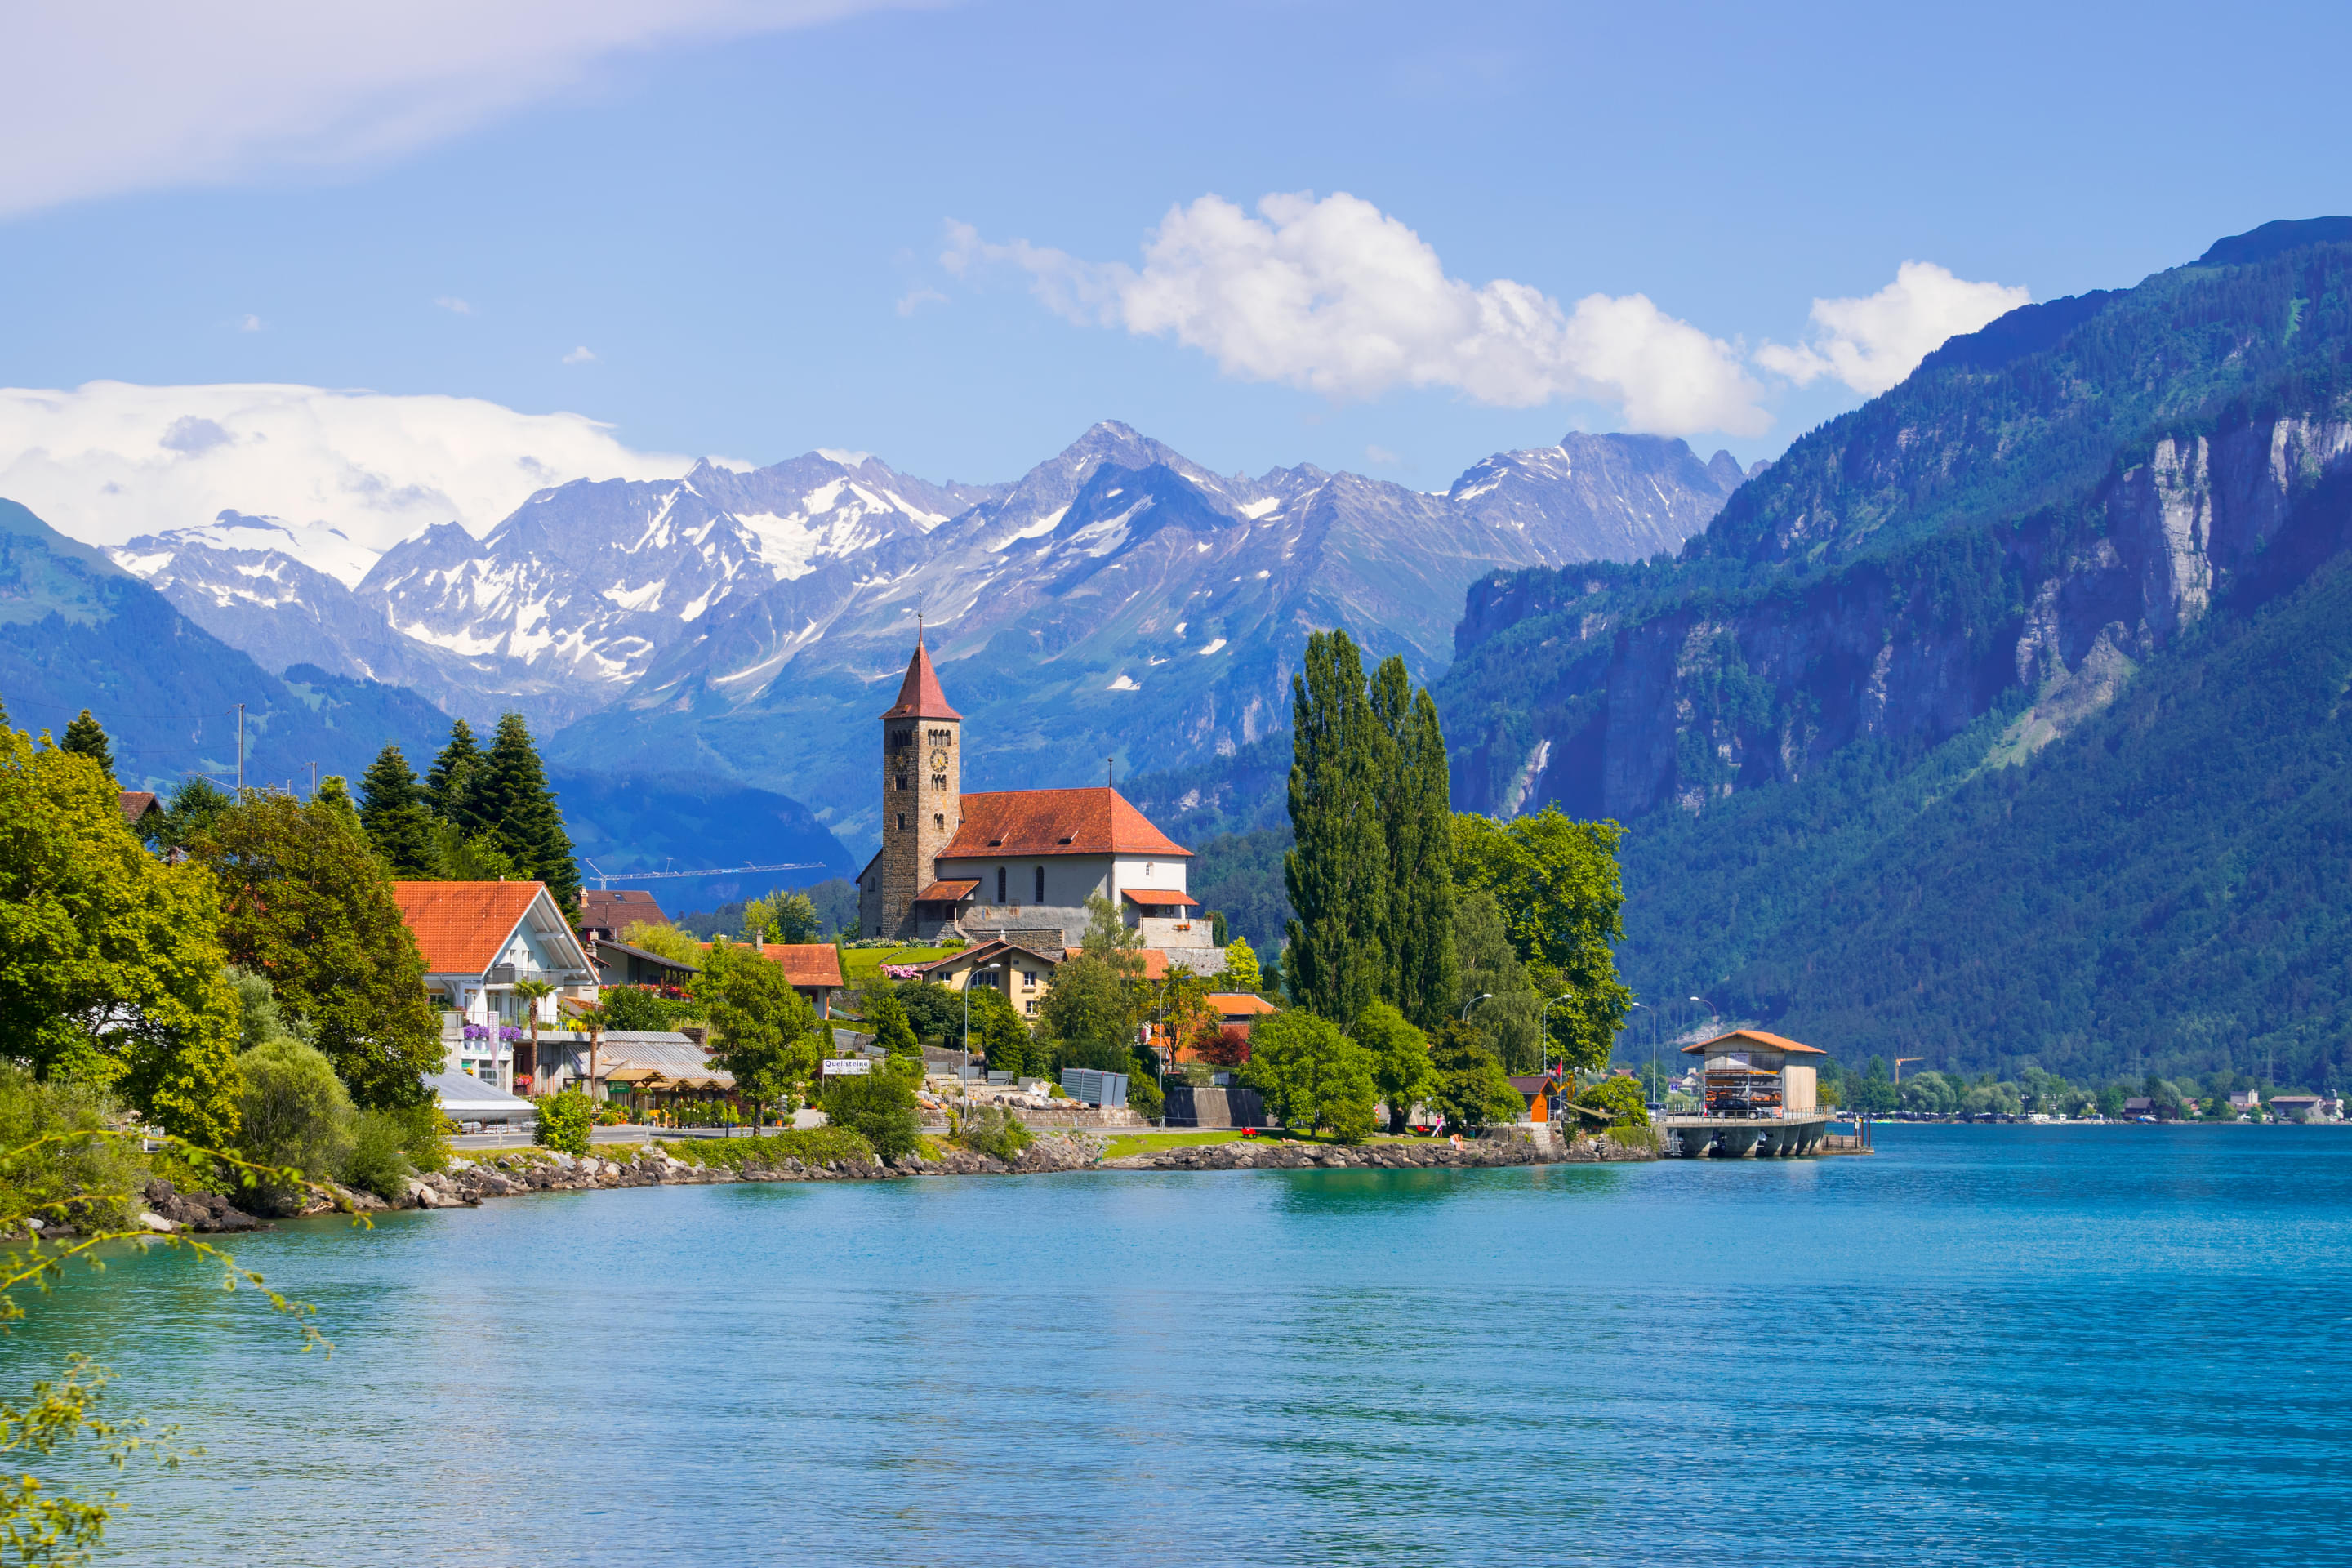 Things to Do in Montreux